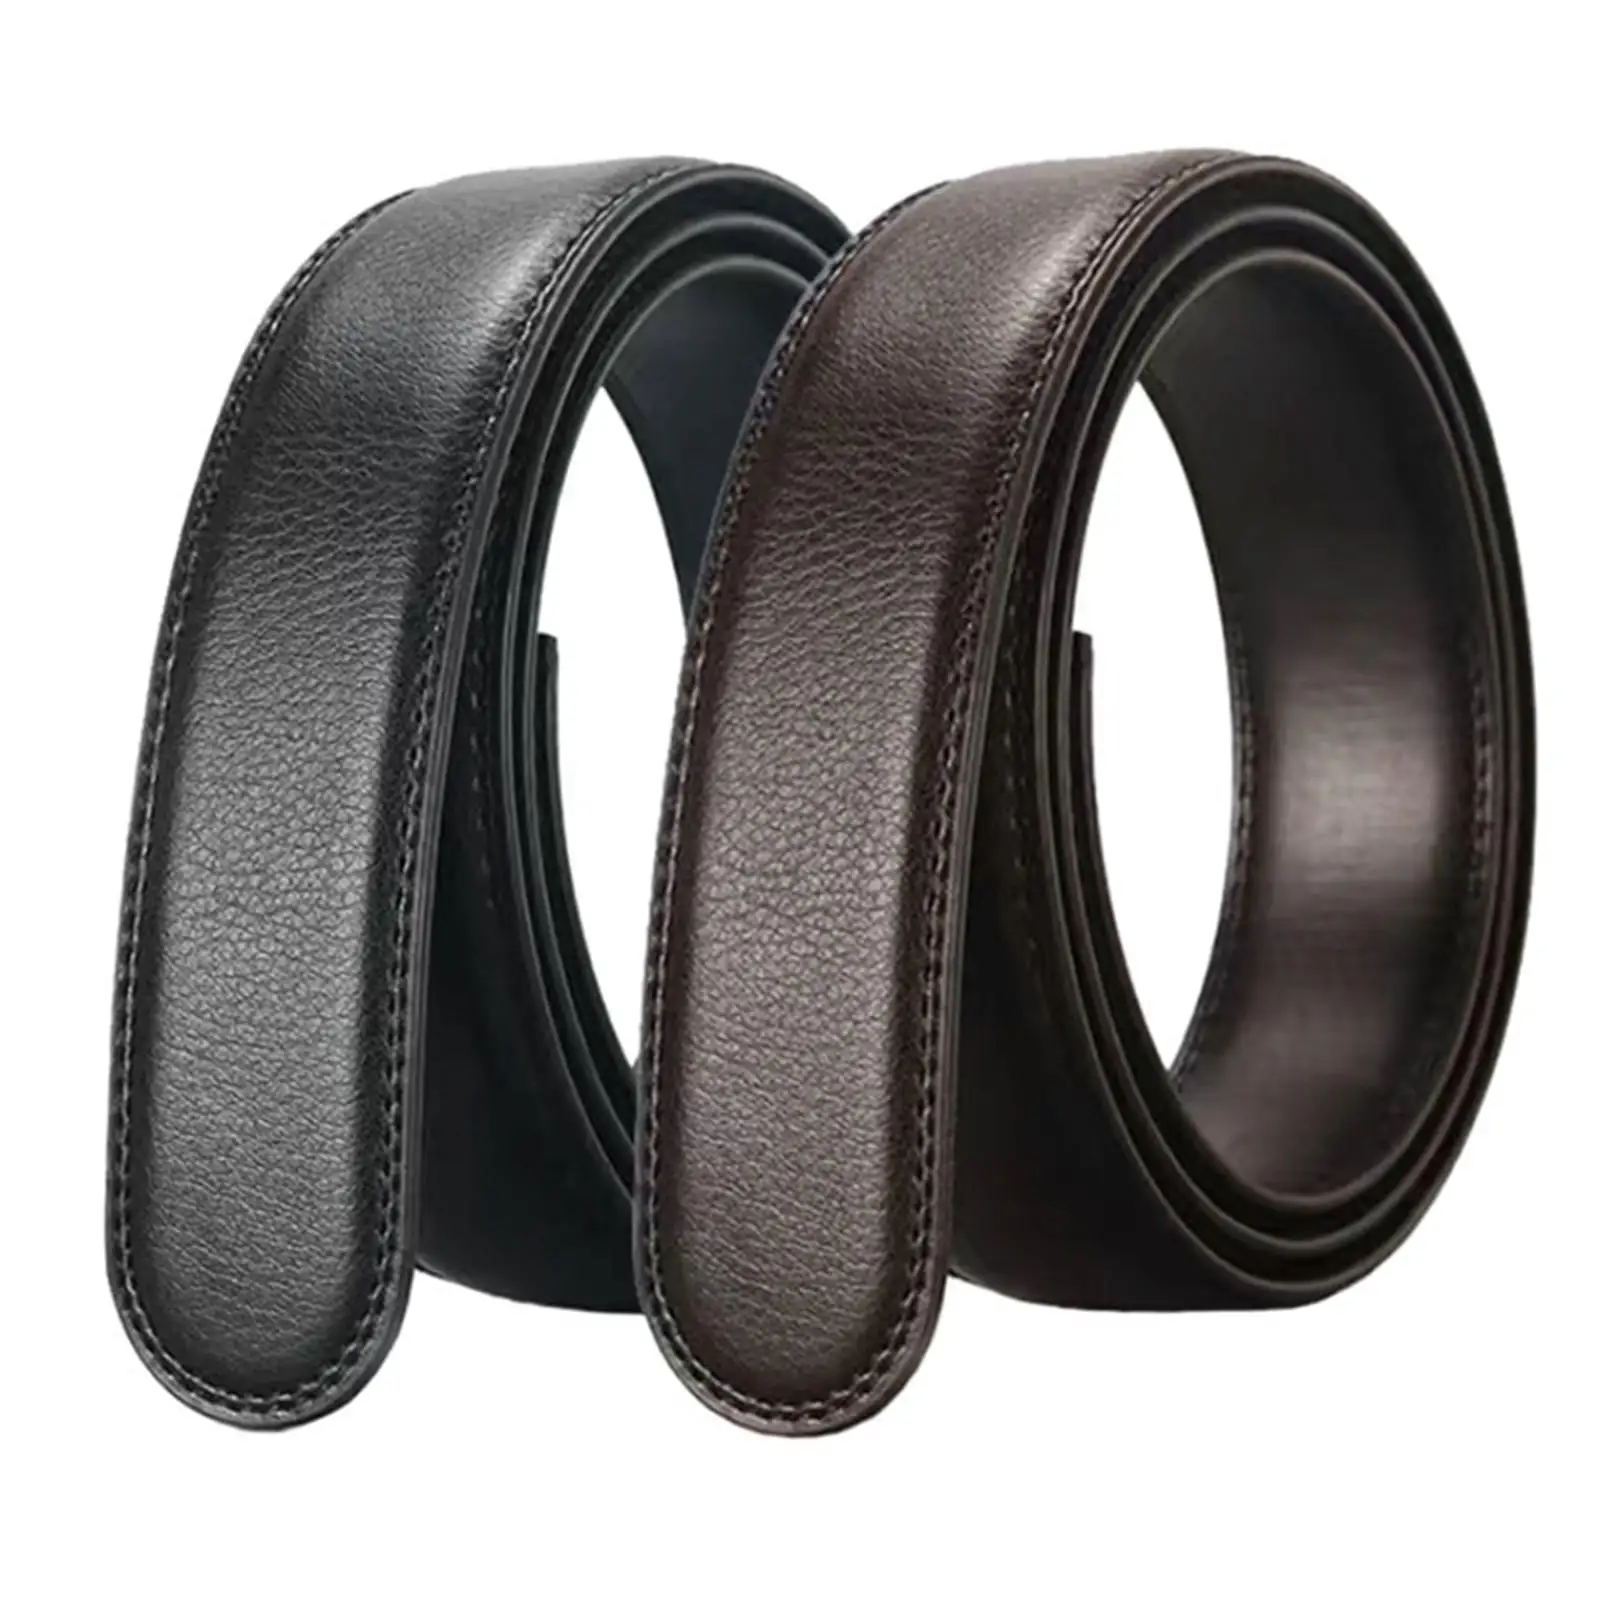 Replacement Belt Strap Casual Lightweight for Male, No Buckle 67